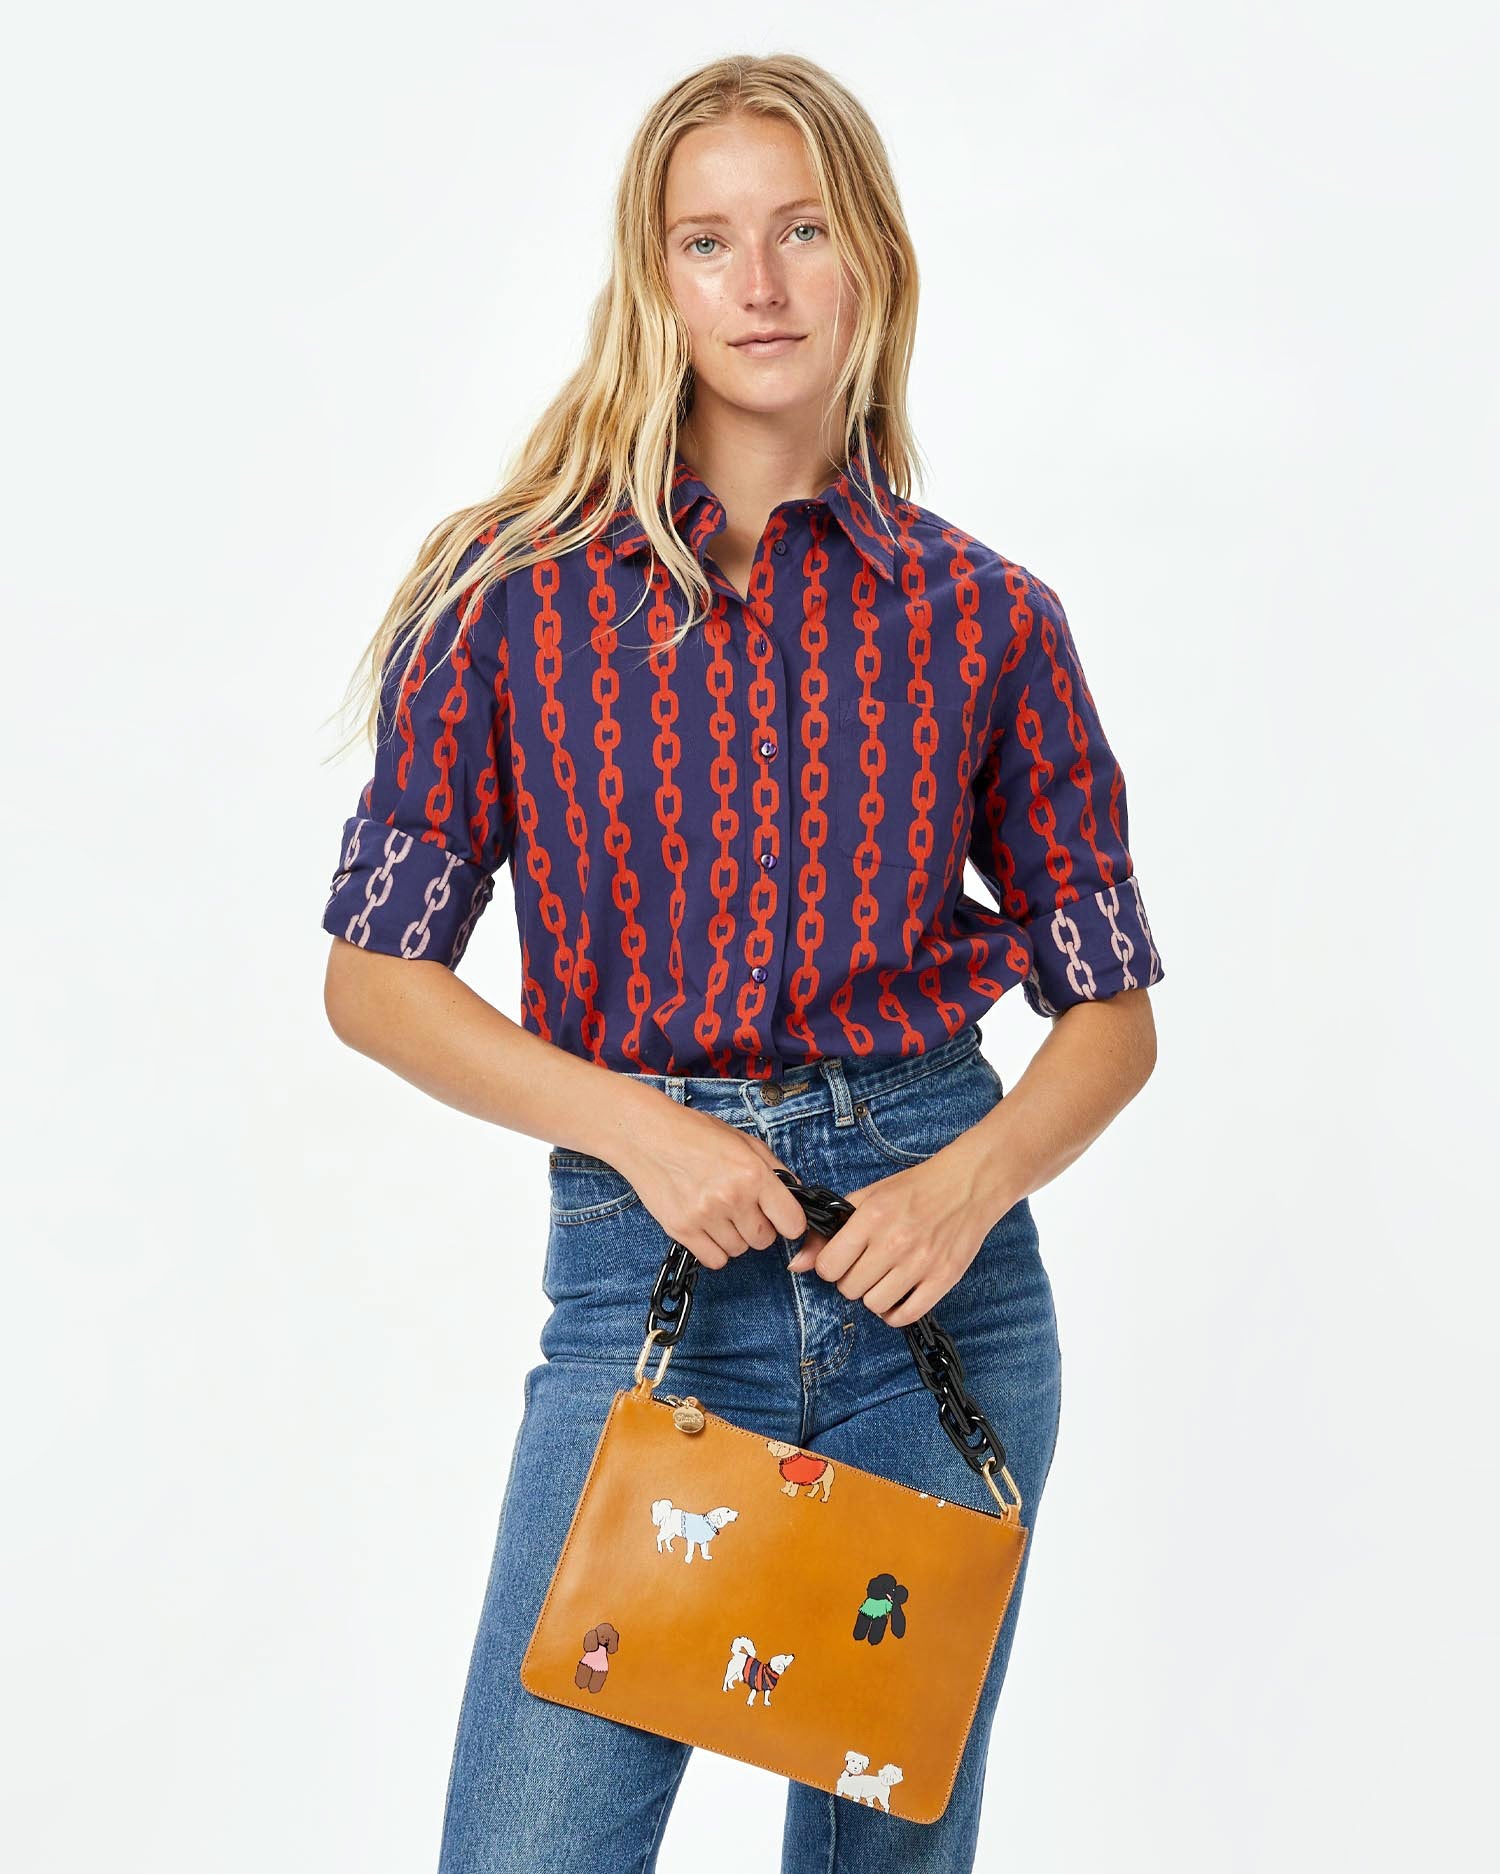 Natalie wearing the Navy and Poppy Chains Felix Blouse with jeans and the cuoio with paco and friends flat clutch with tabs with the black resin shortie strap attached